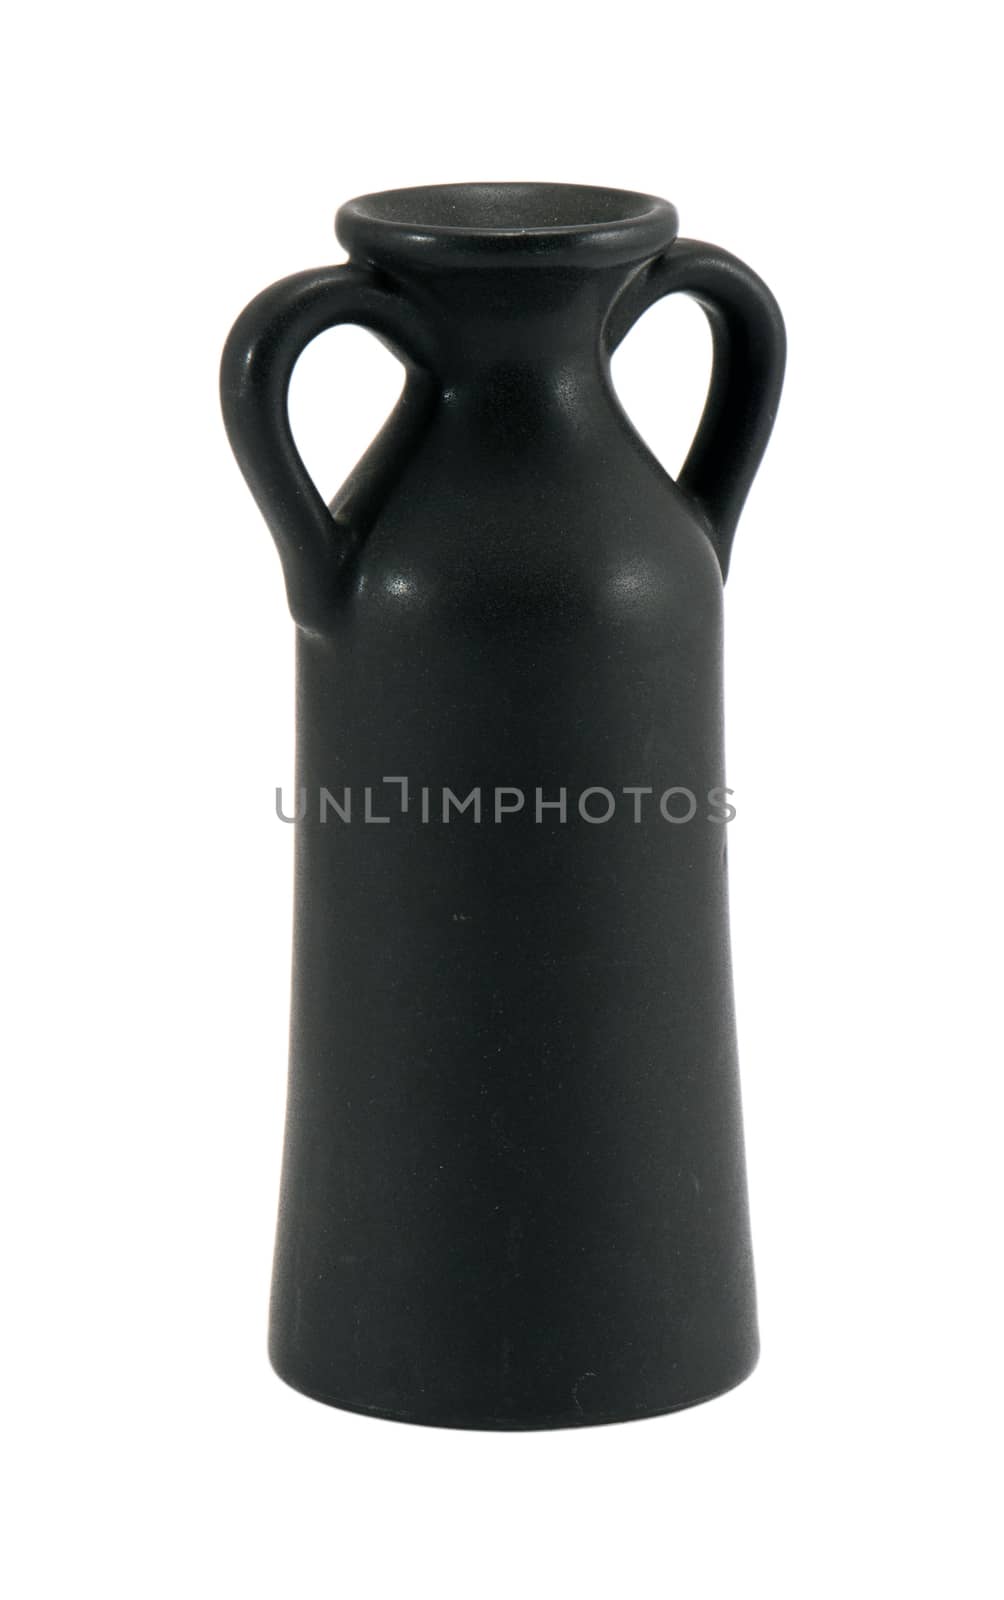 old ceramic vase with two handles isolated on white background.